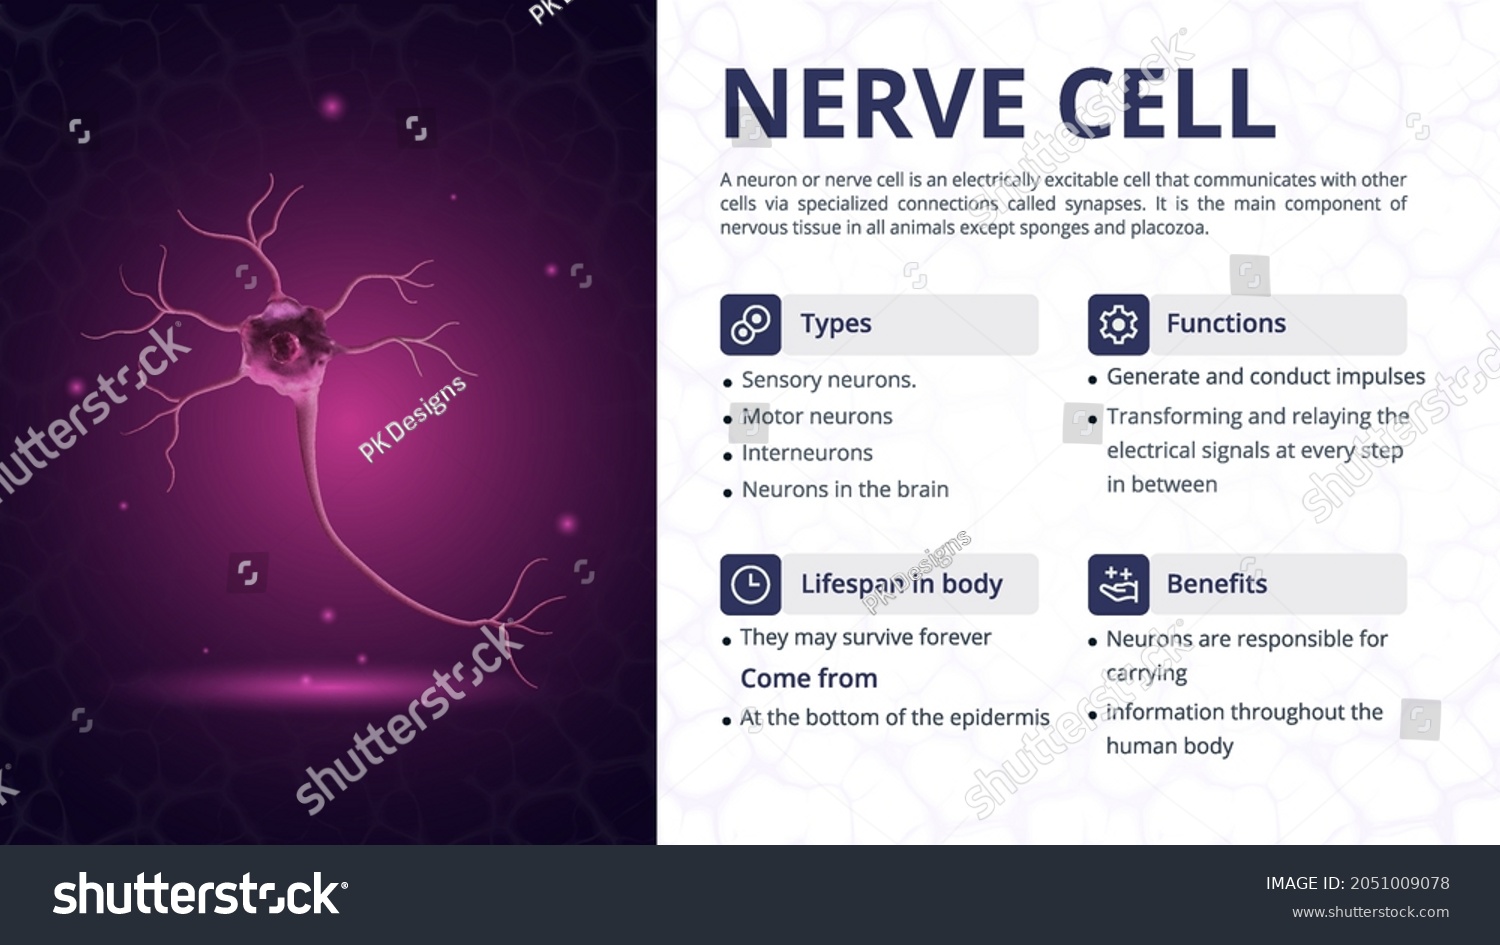 SVG of Structure, Function and Types of Nerve Cell Vector Image Design svg